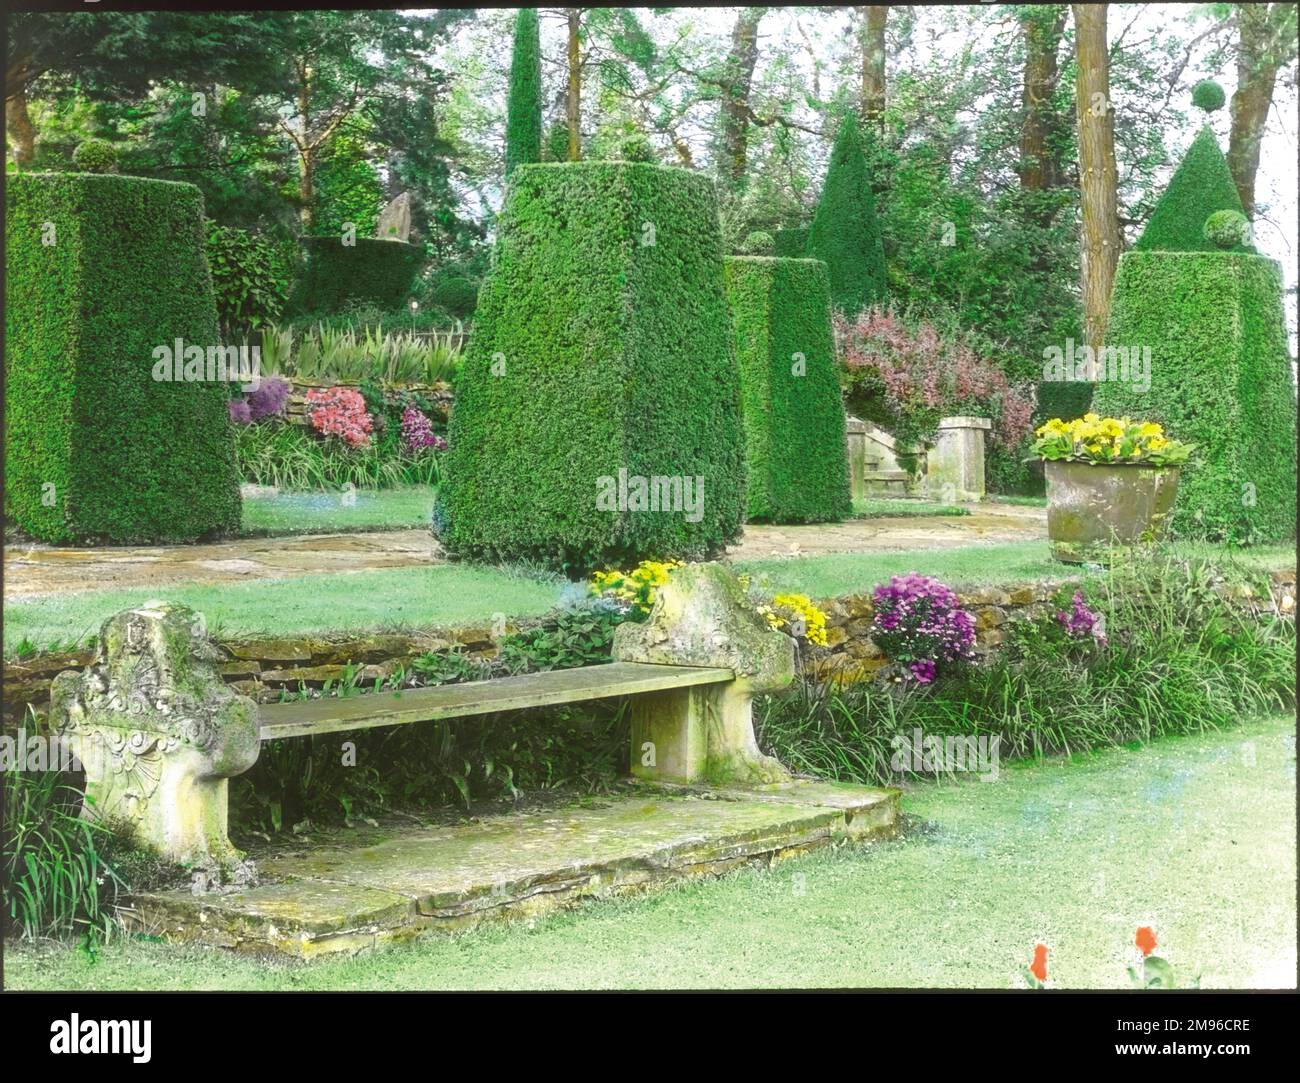 View of the gardens at Sedgewick Park House, near Horsham, West Sussex.  A stone bench can be seen in the foreground, with carefully shaped bushes behind, as well as grass, flowers and trees. Stock Photo